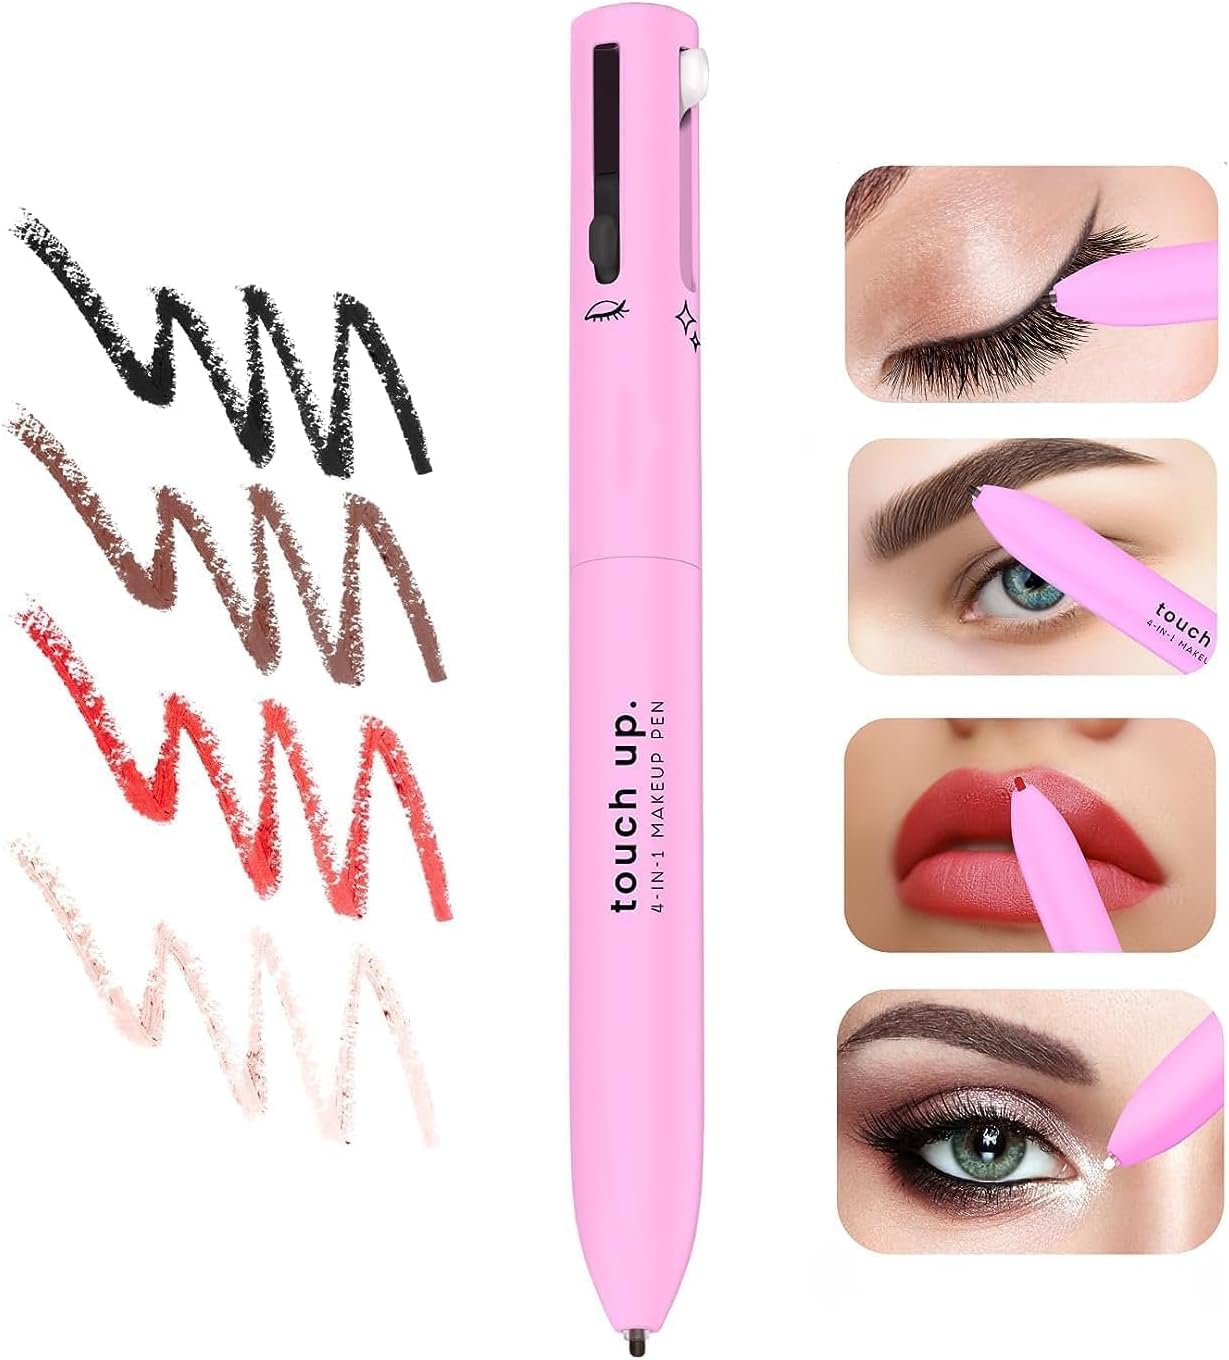 Pretocter 4-in-1 Makeup Pen, Multi-Functional Makeup Pencil with Black Eye Liner/Brown Brow Liner/Pink Lip Liner/Champagne Highlighter All-in-One, Waterproof Touch Up Makeup Pen Travel Cosmetic Tool